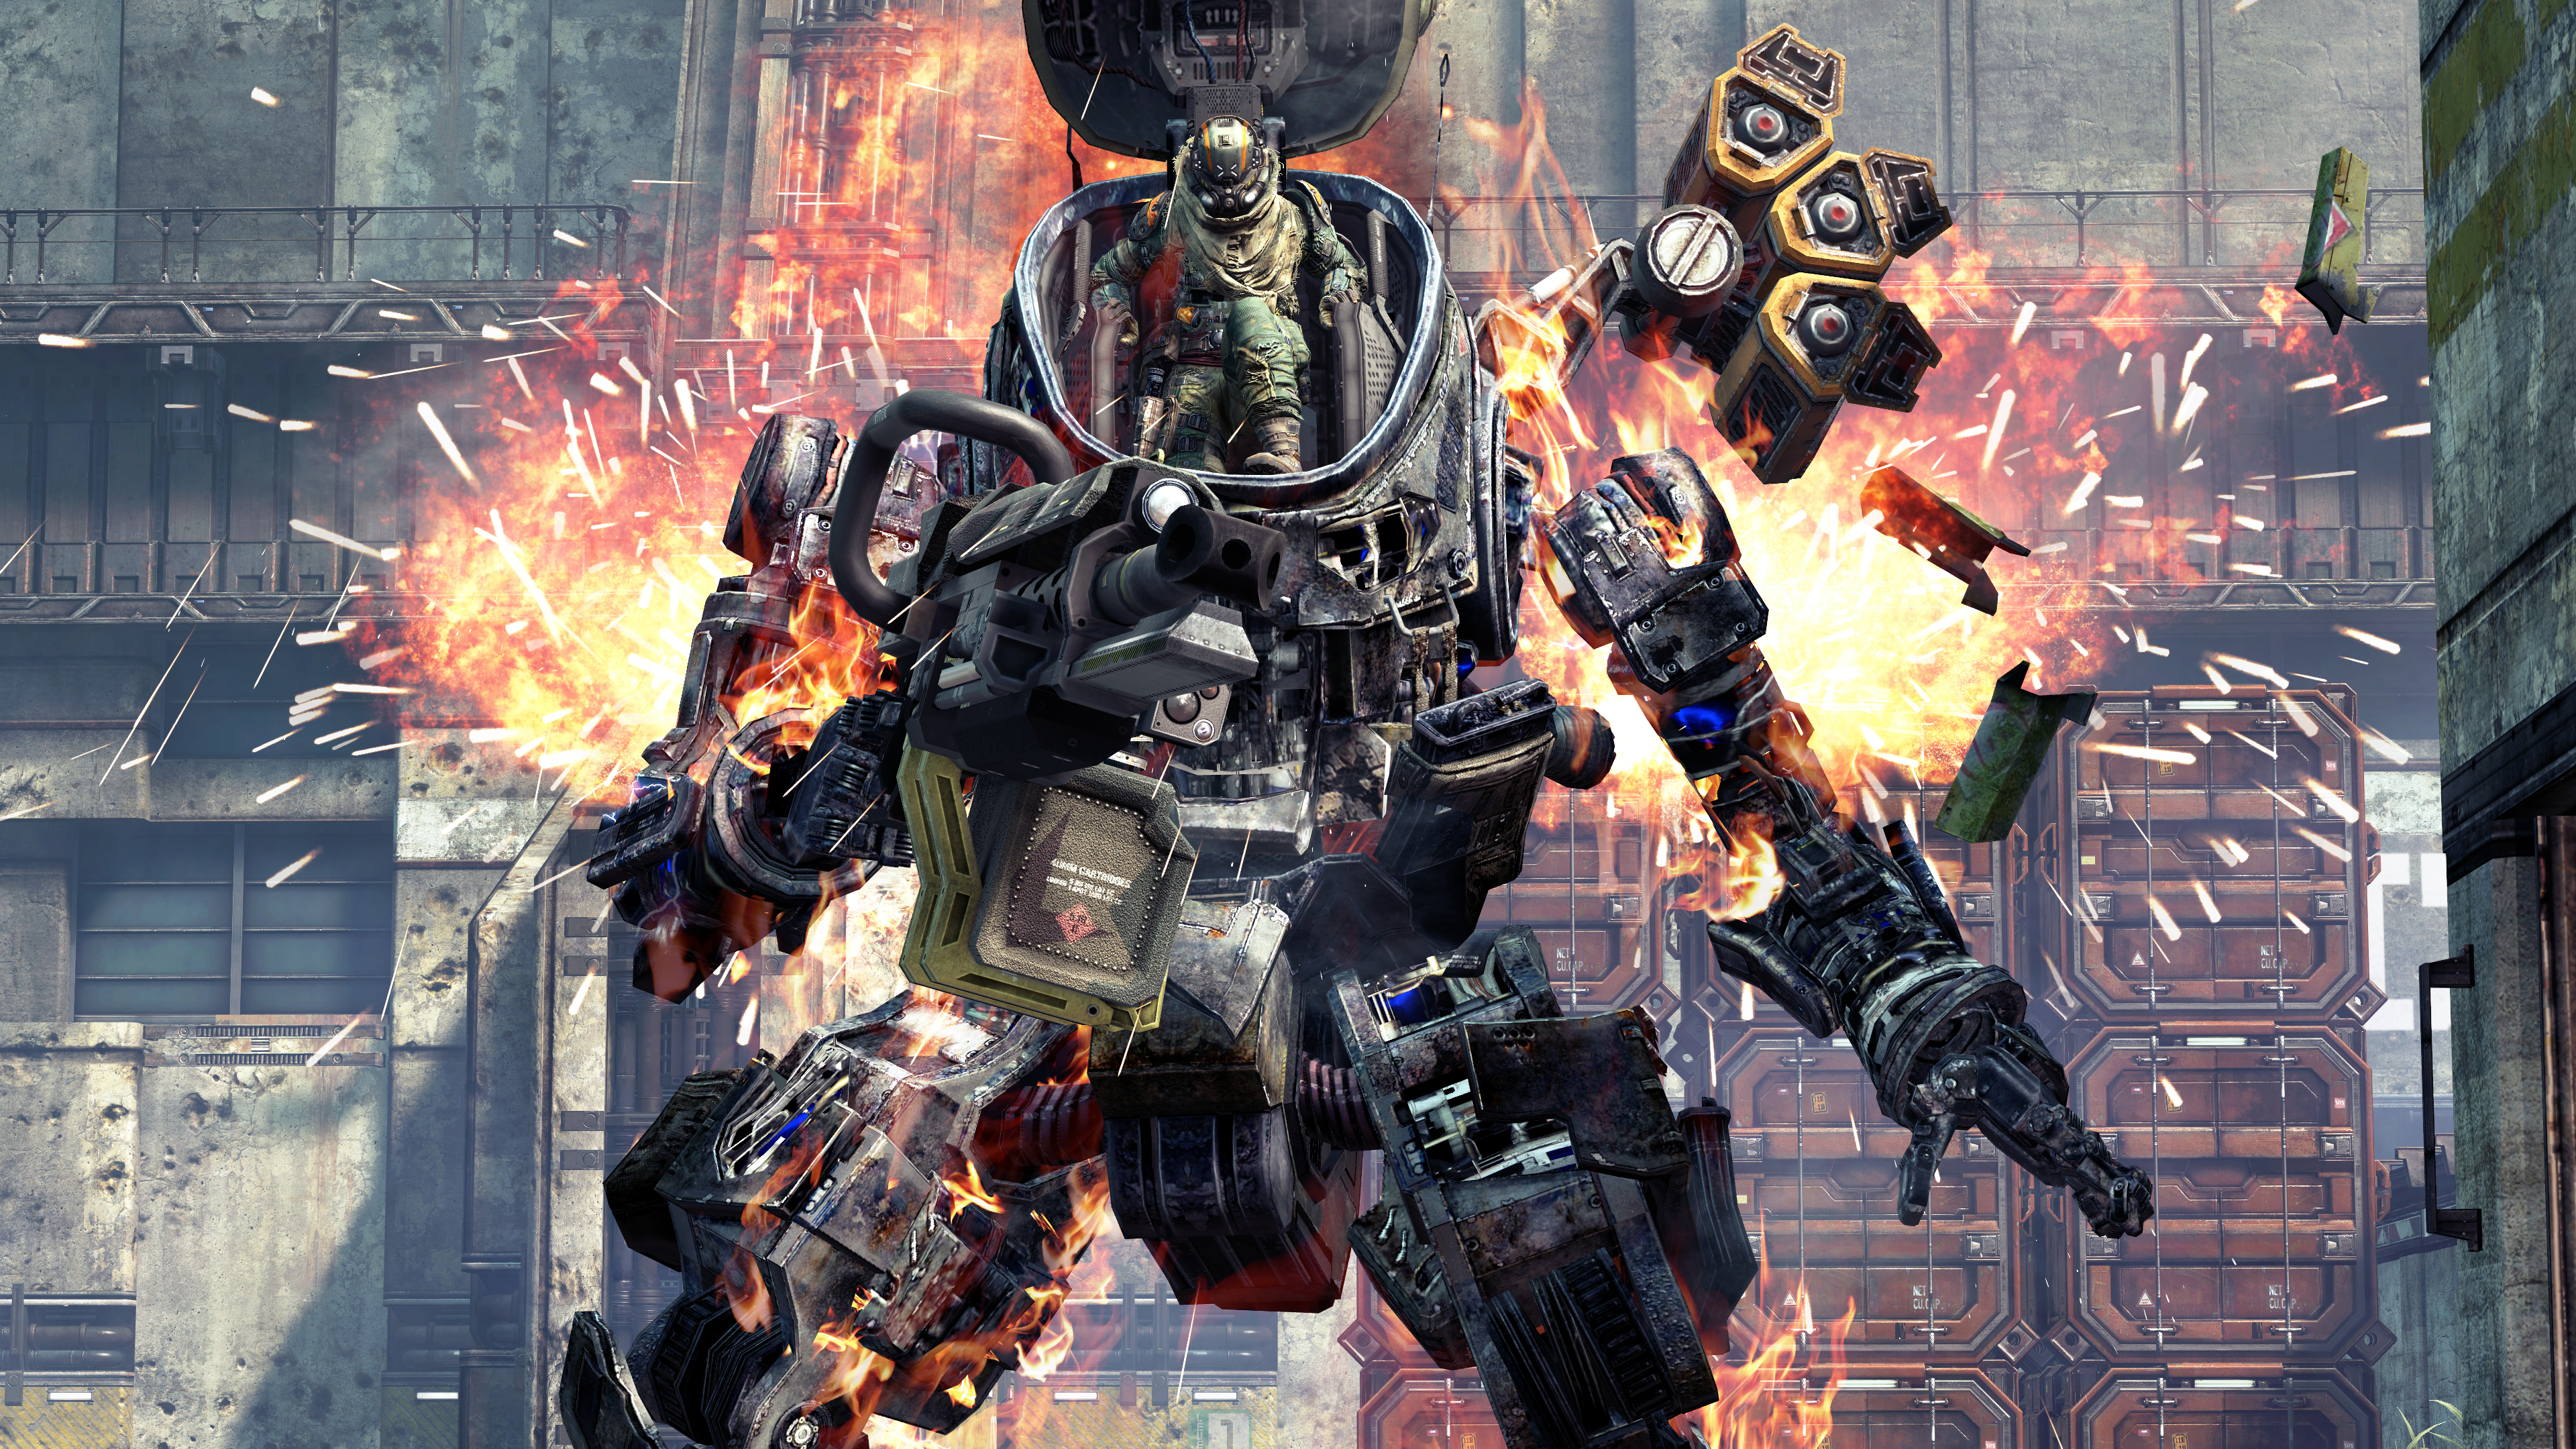 Titanfall 2 - The Epic Sequel to the Genre-Redefining Titanfall -  Electronic Arts